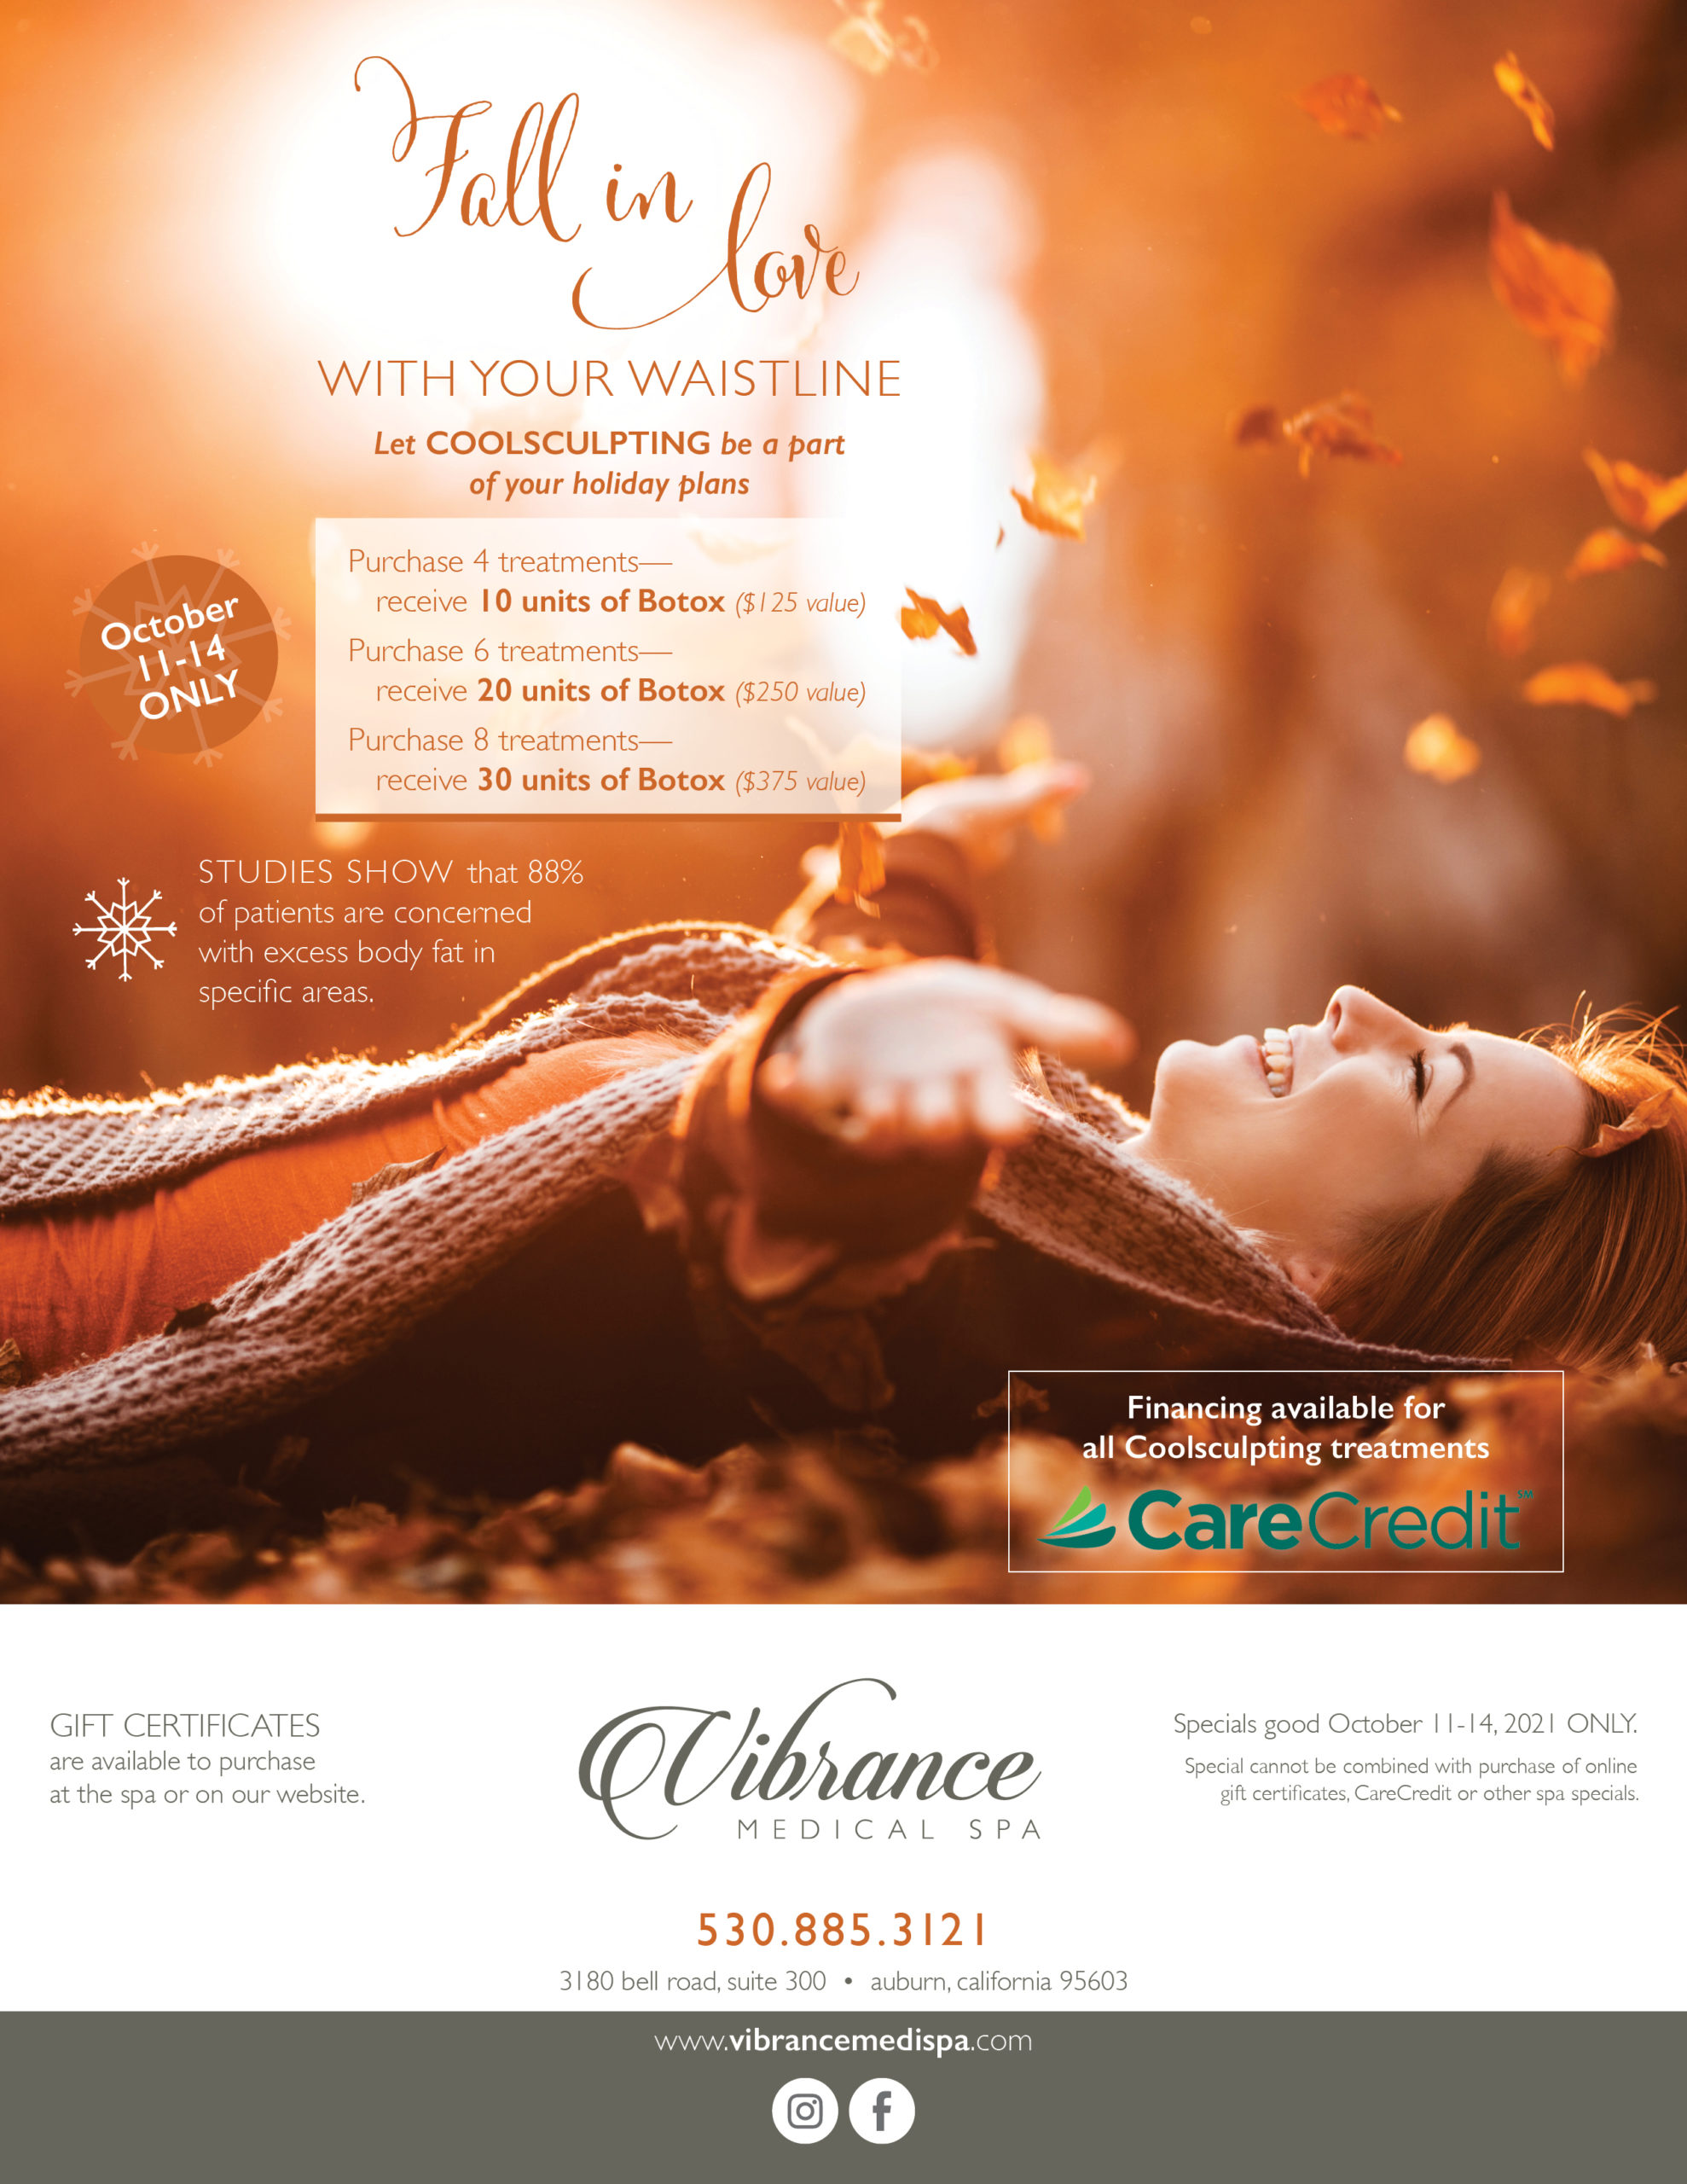 Fall in Love with your waistline, let coolsculpting be a part of your holiday plans